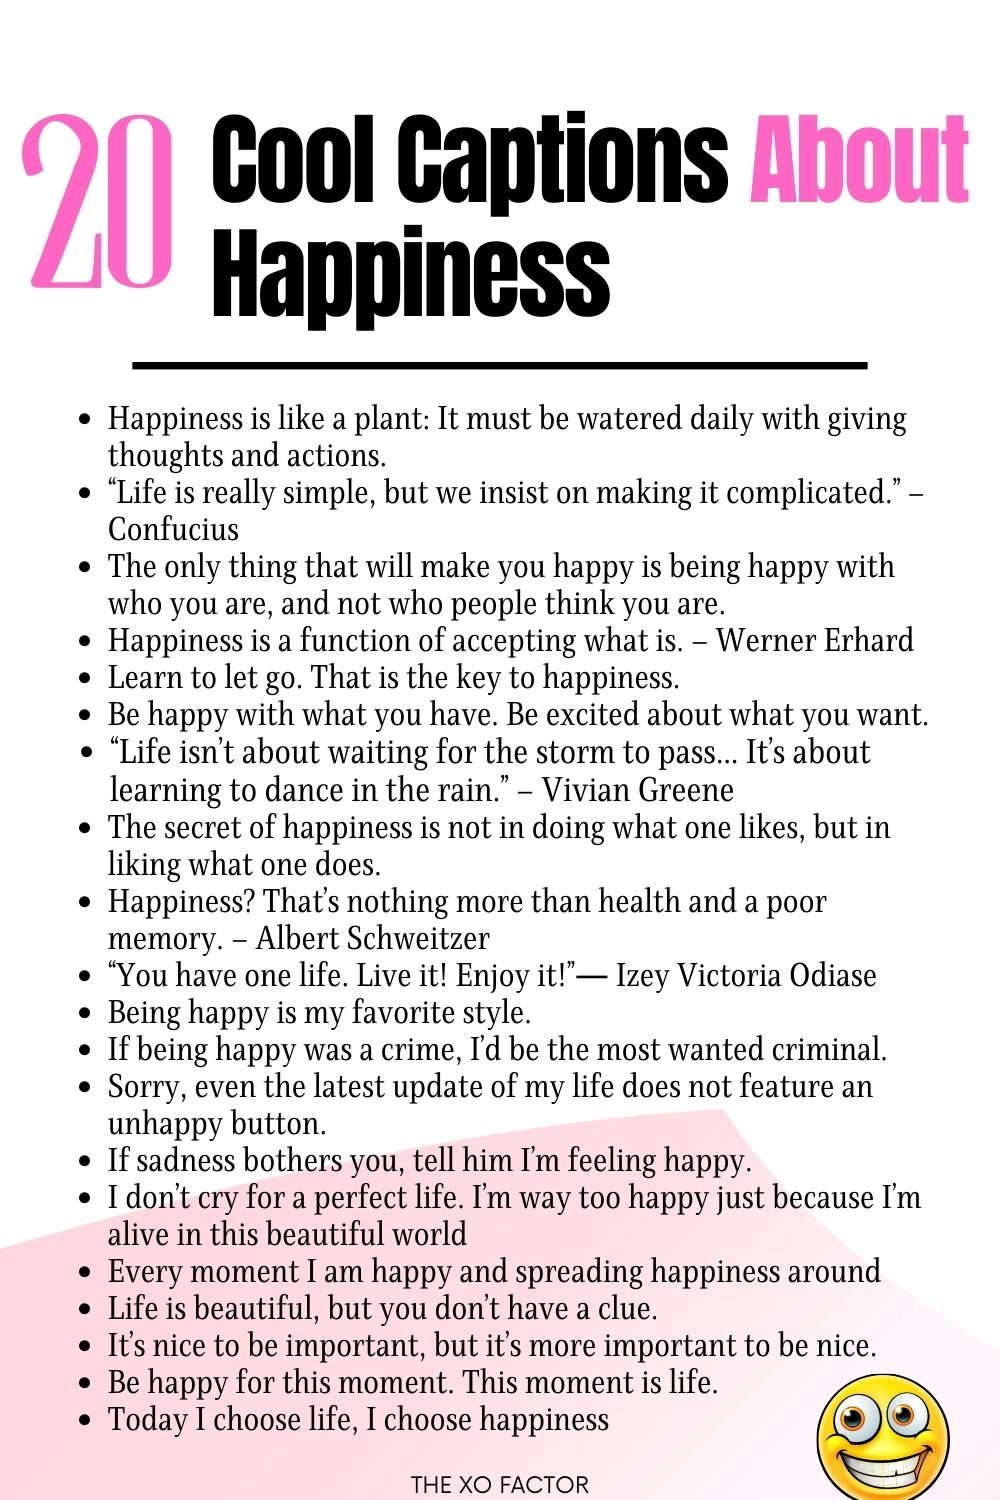 Cool Captions About Happiness